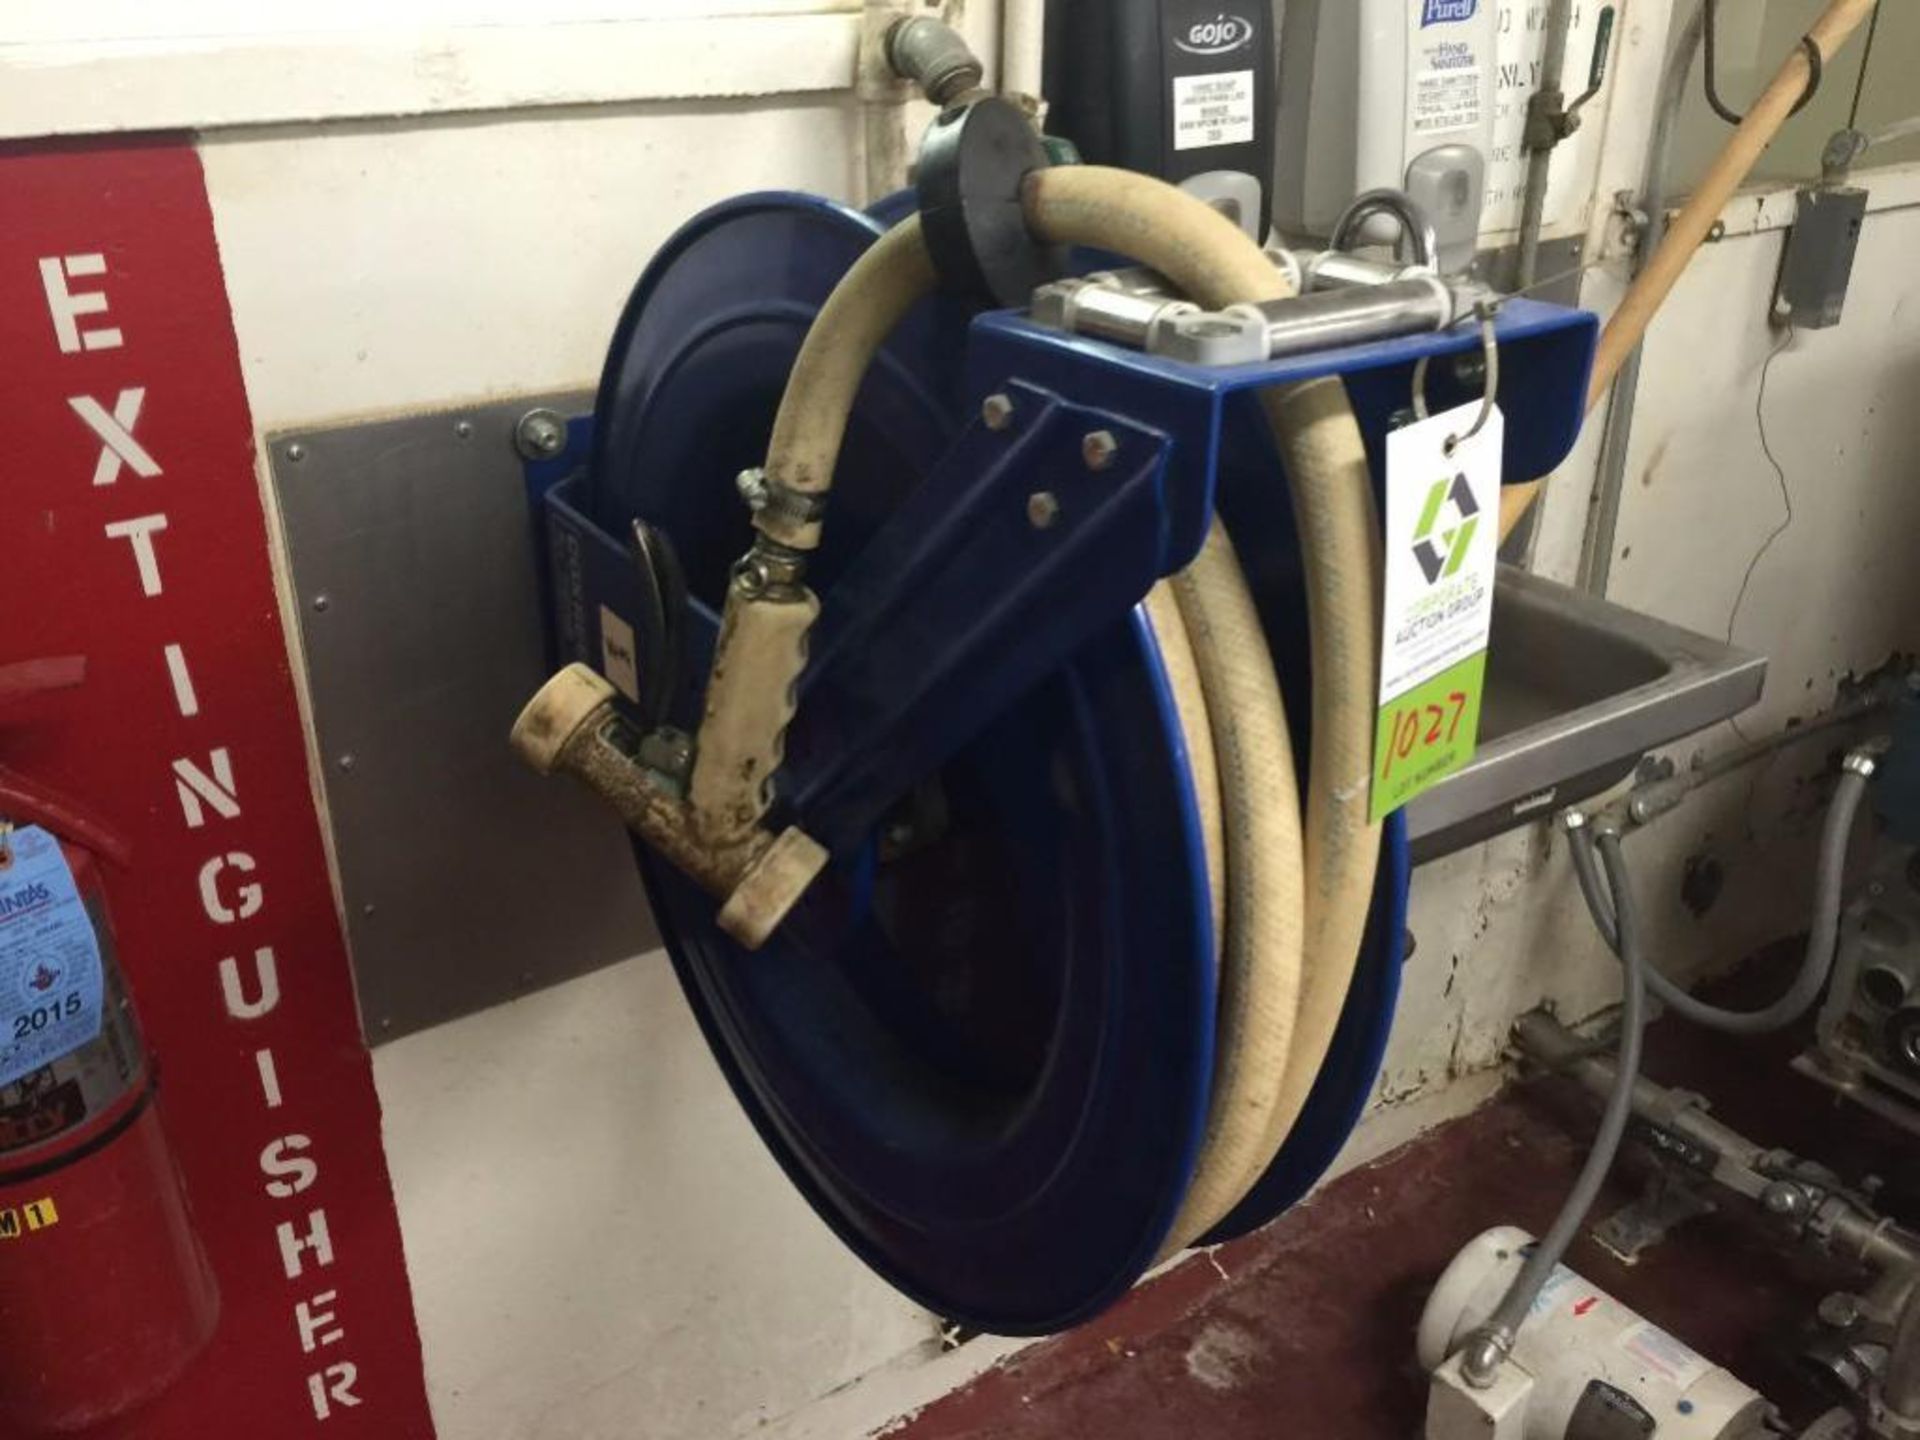 Water hose reel and hose (EACH) - Rigging Fee: $100